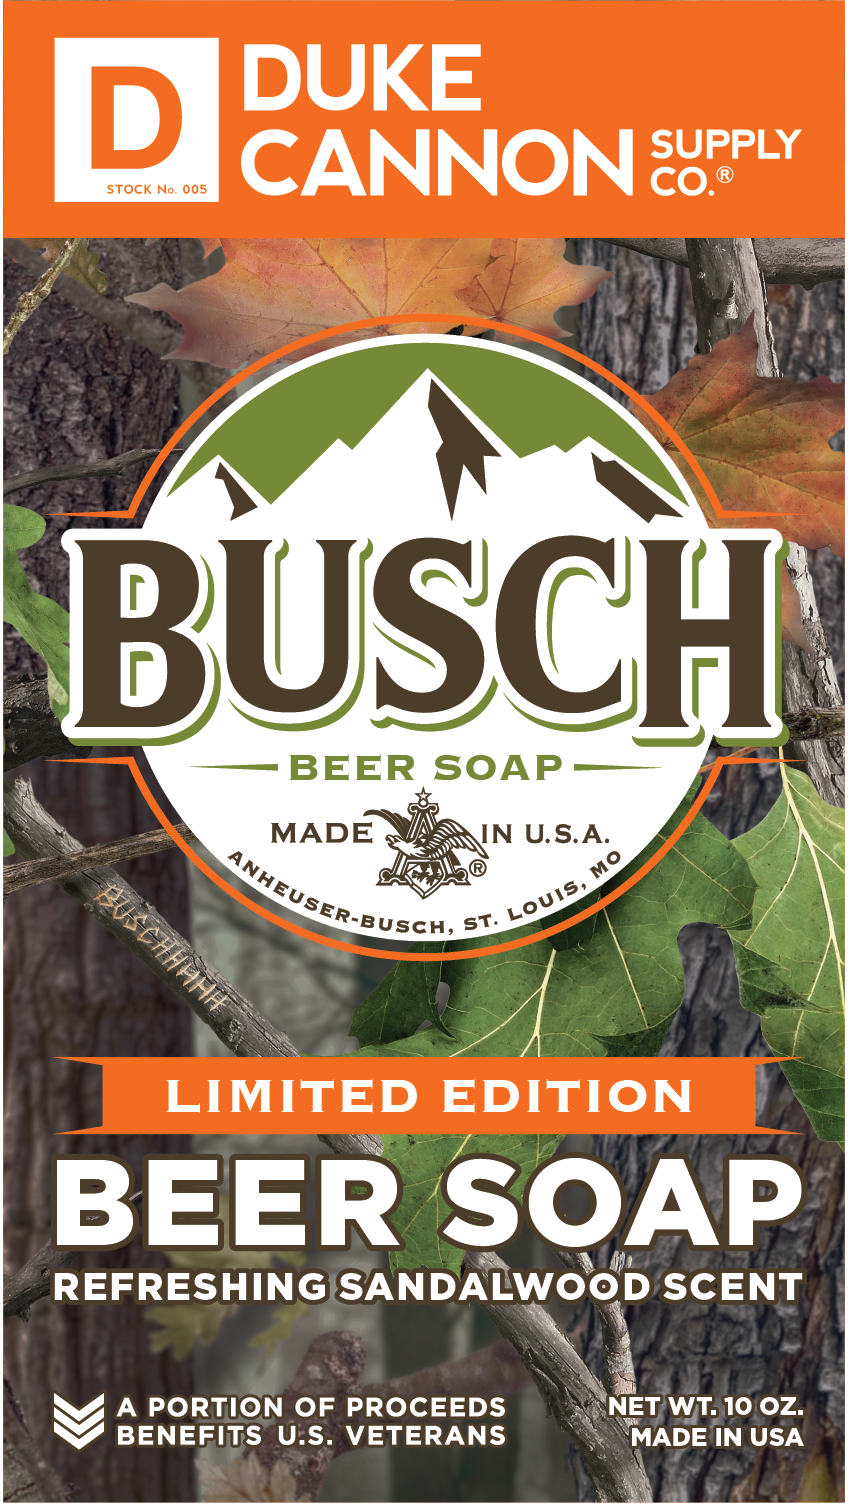 Busch Beer Soap - Special Hunting Edition